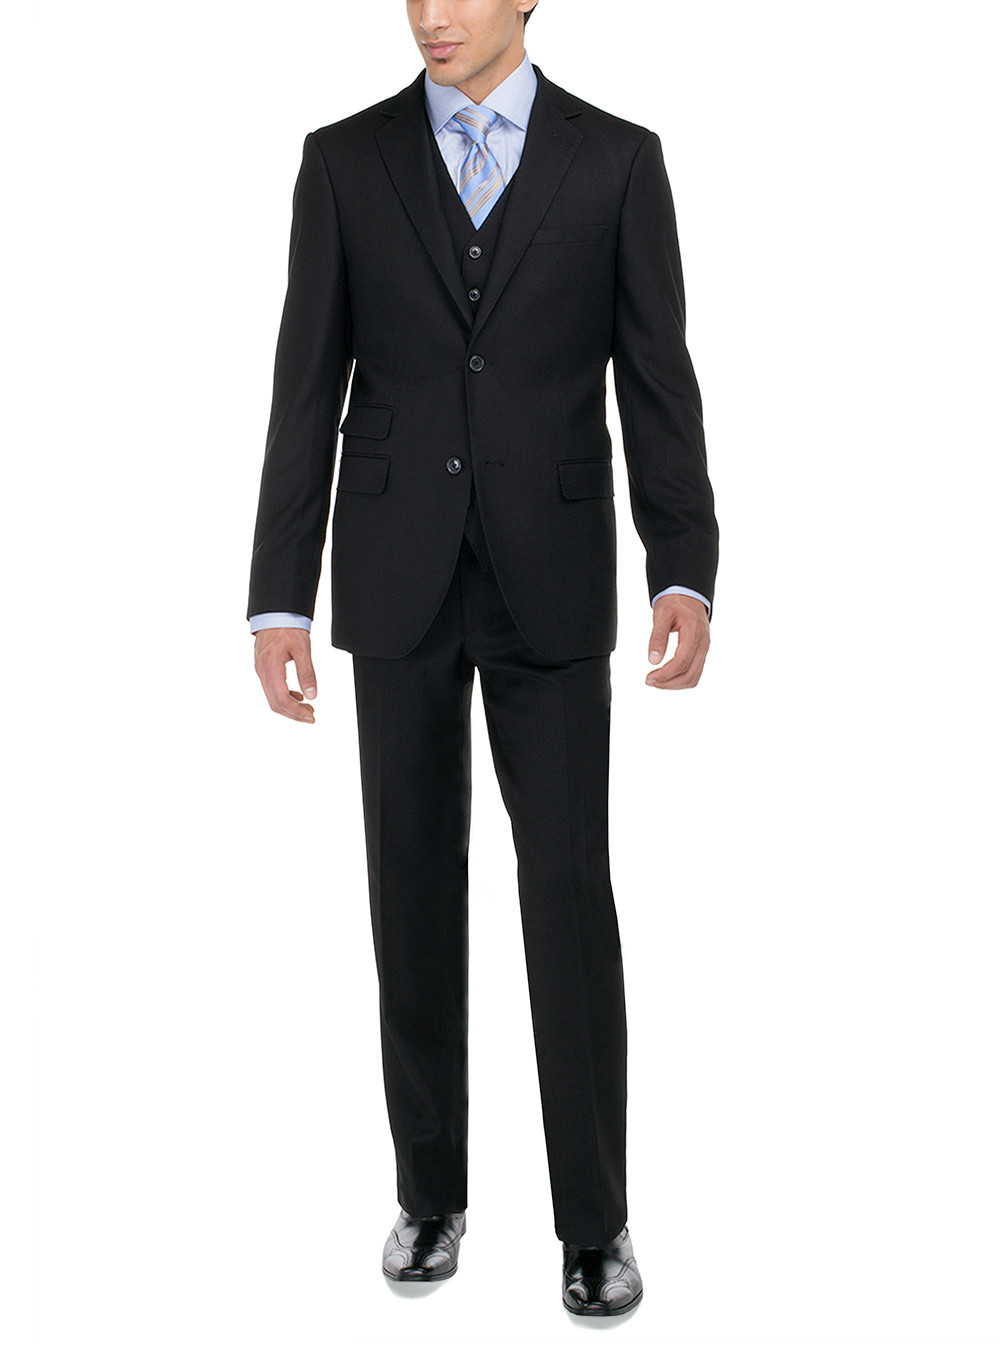 Mens Black 3 Button vested 3 piece suits by Luciano Natazzi - Fashion ...